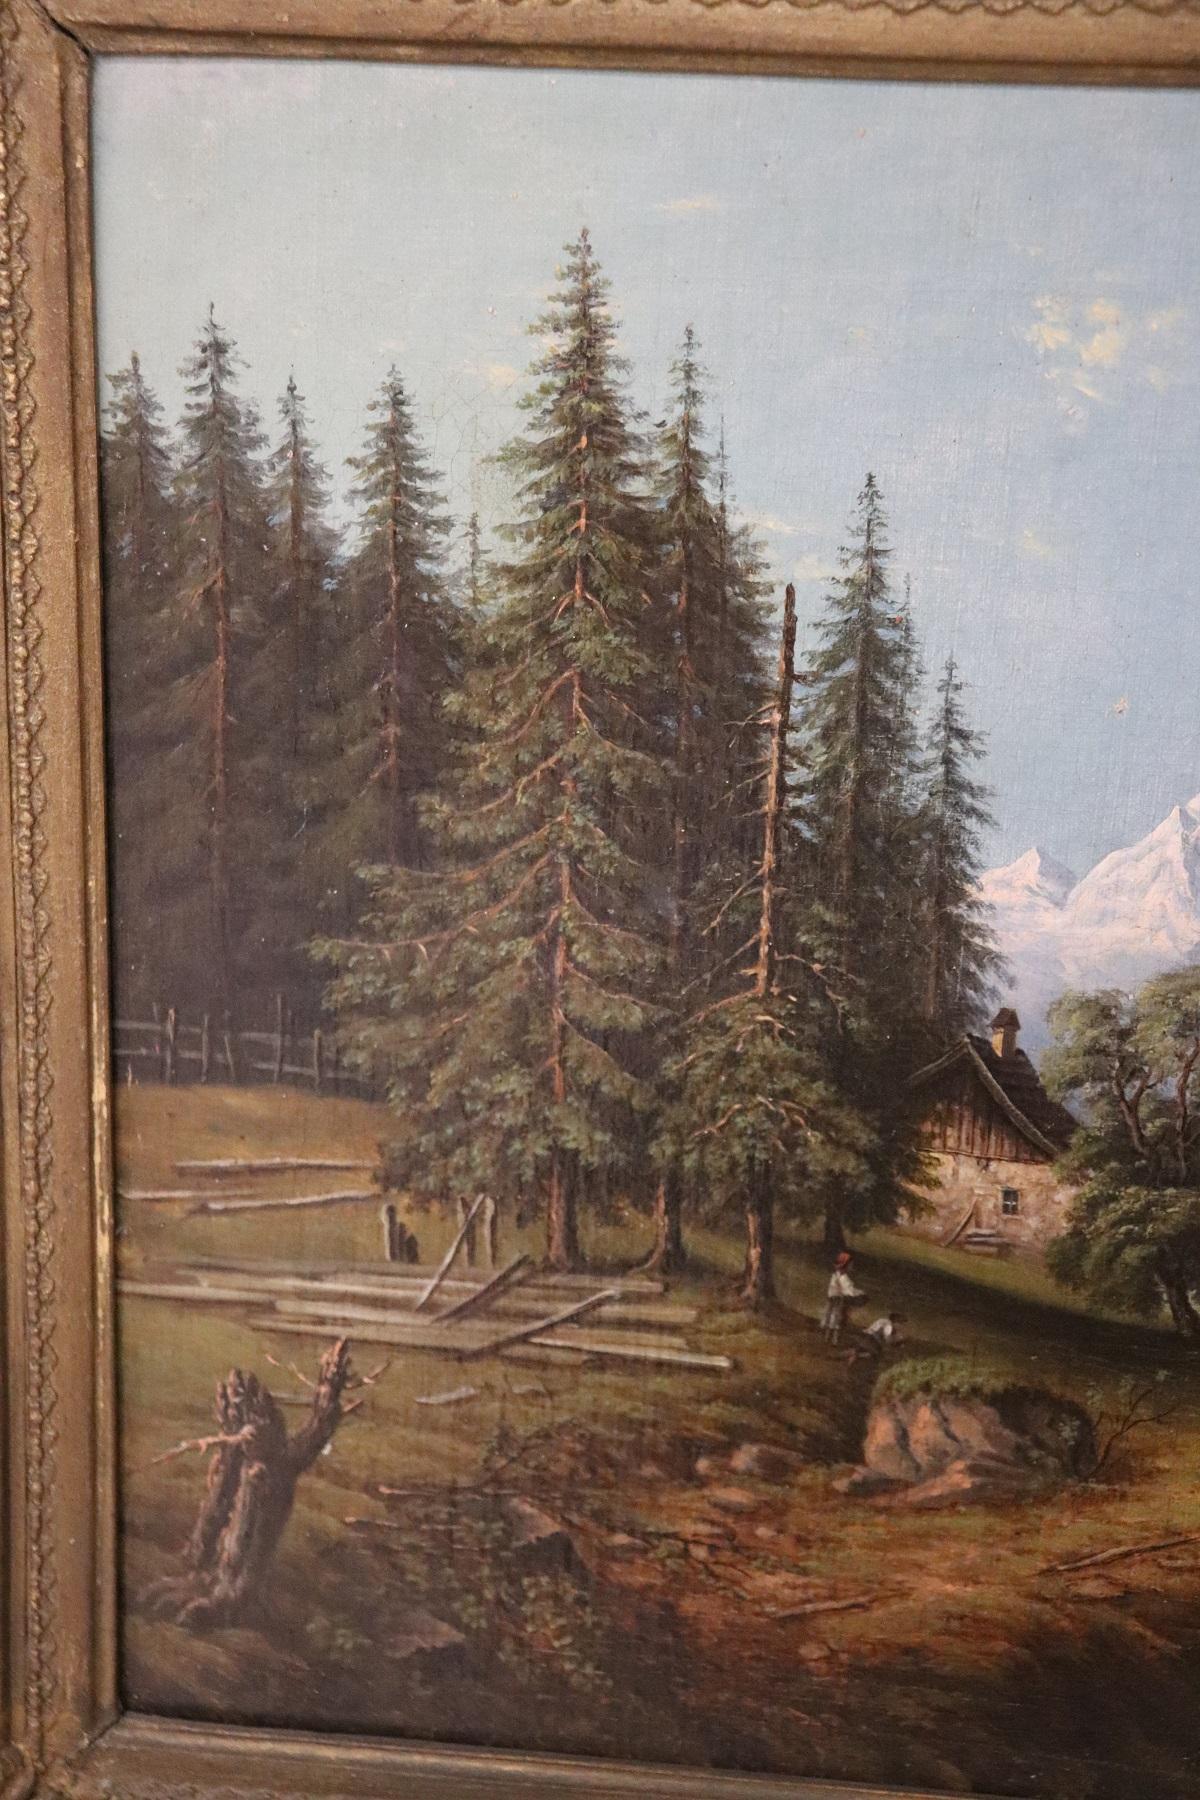 Important refined oil painting on canvas from an important collection of 19th century paintings. The subject is a mountain landscape with lake and characters. The landscape and the pictorial quality suggest a painter from northern Europe. Note the